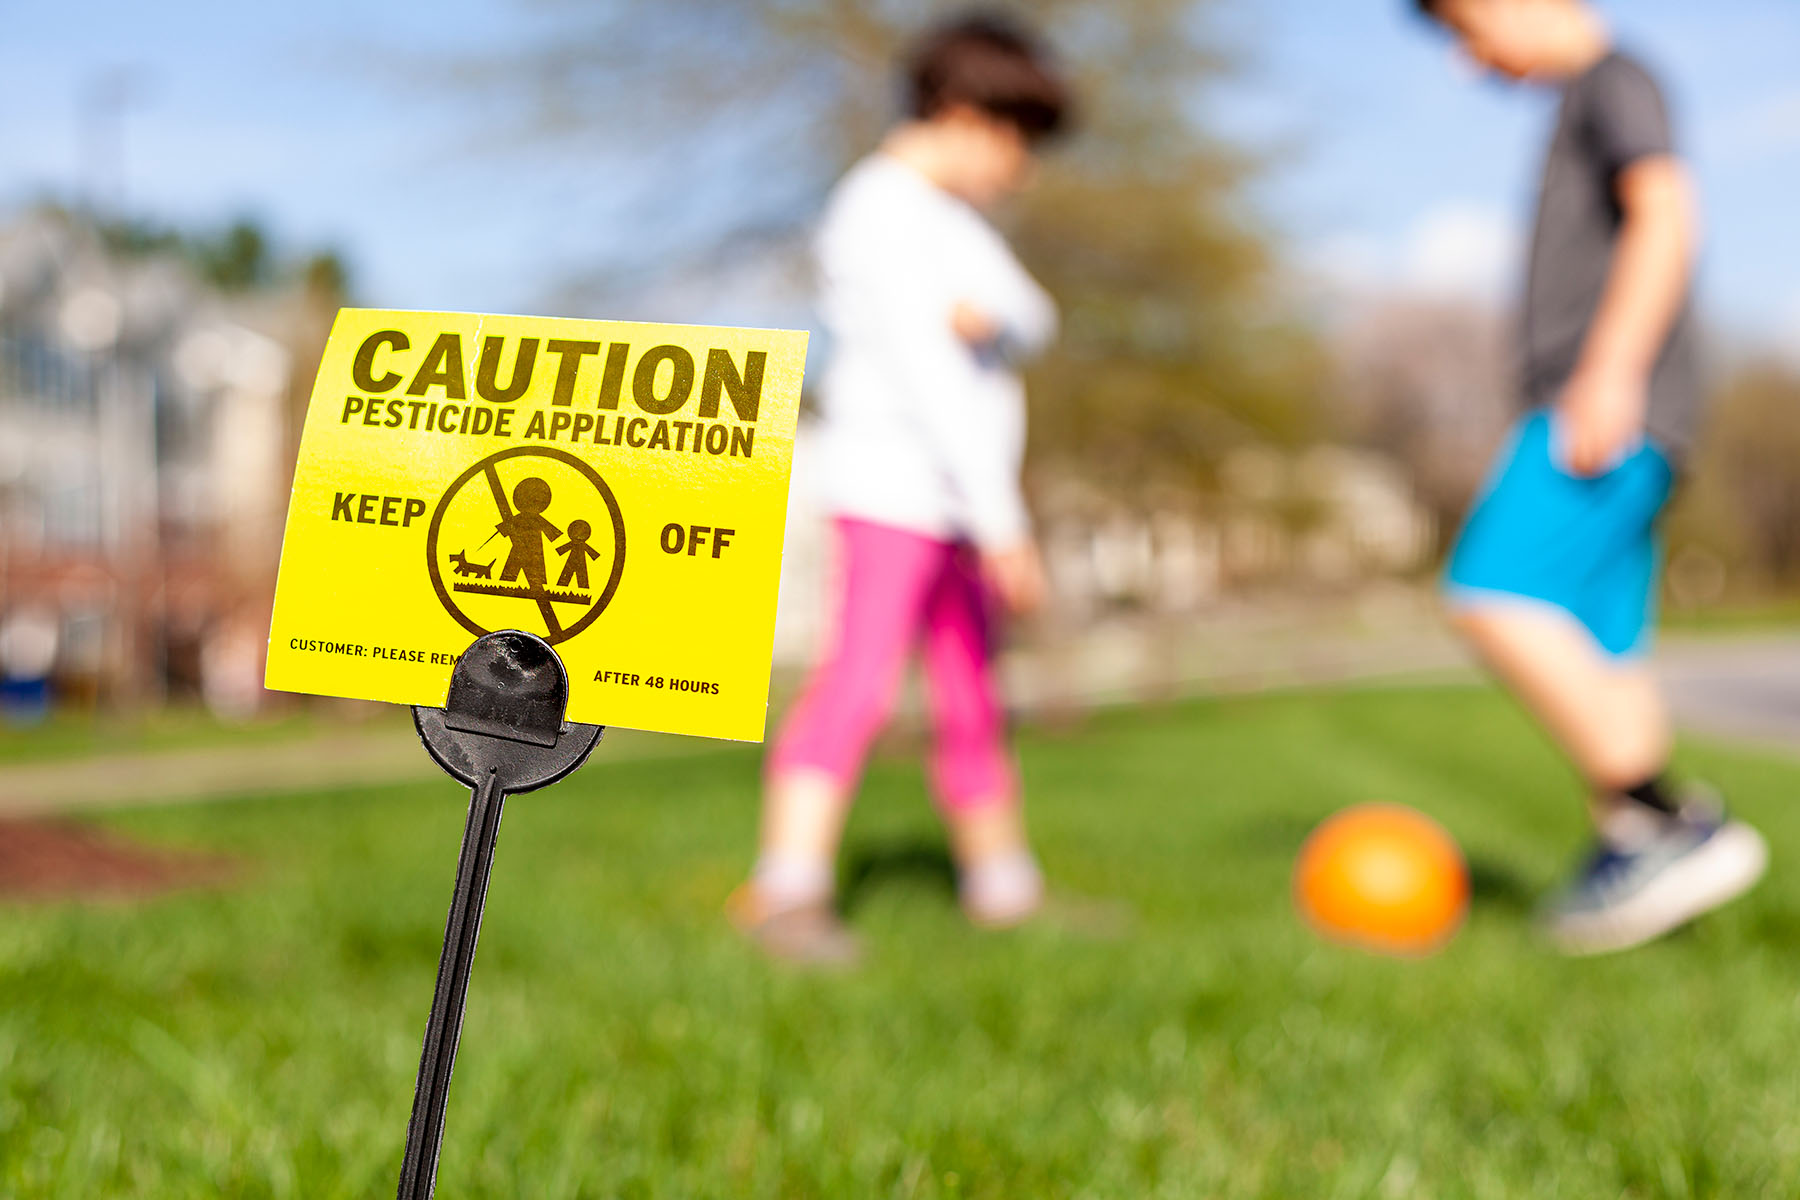 Kids playing behind a sign warning about pesticides in lawn.